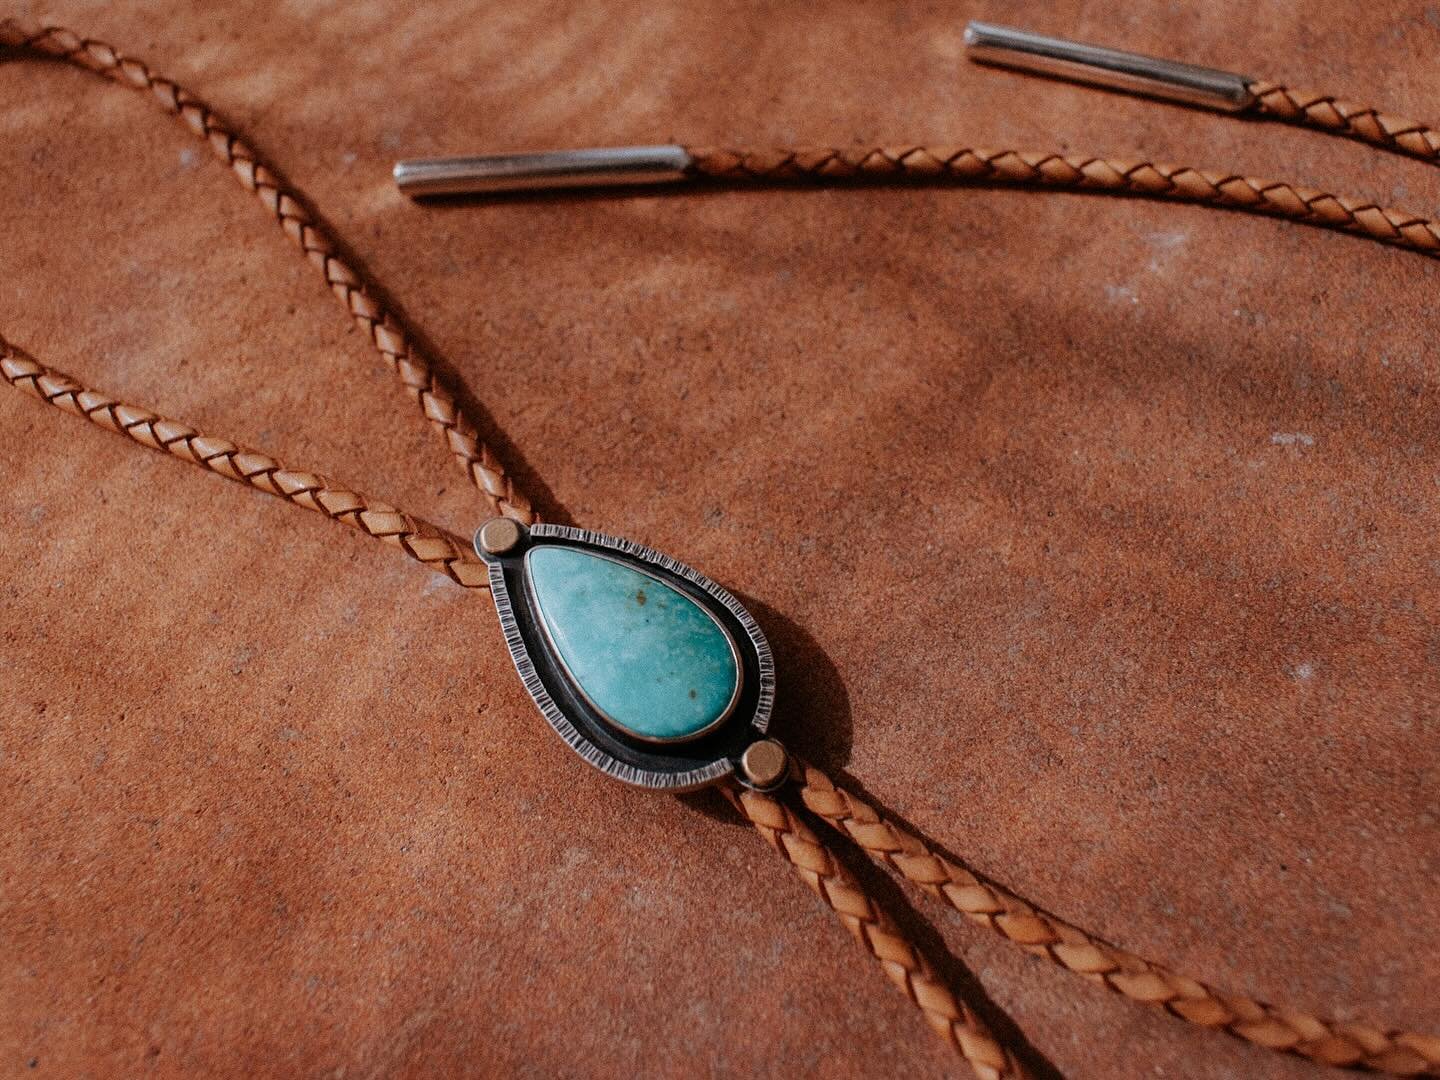 A simple little gem of a bolo for this fine Sunday afternoon.
I hope the weekend has treated you well my friends! Restorative in nature, full of good food, adventure (or daydreaming) and laughter 🌞 
&bull;
This sterling silver, brass, and turquoise 